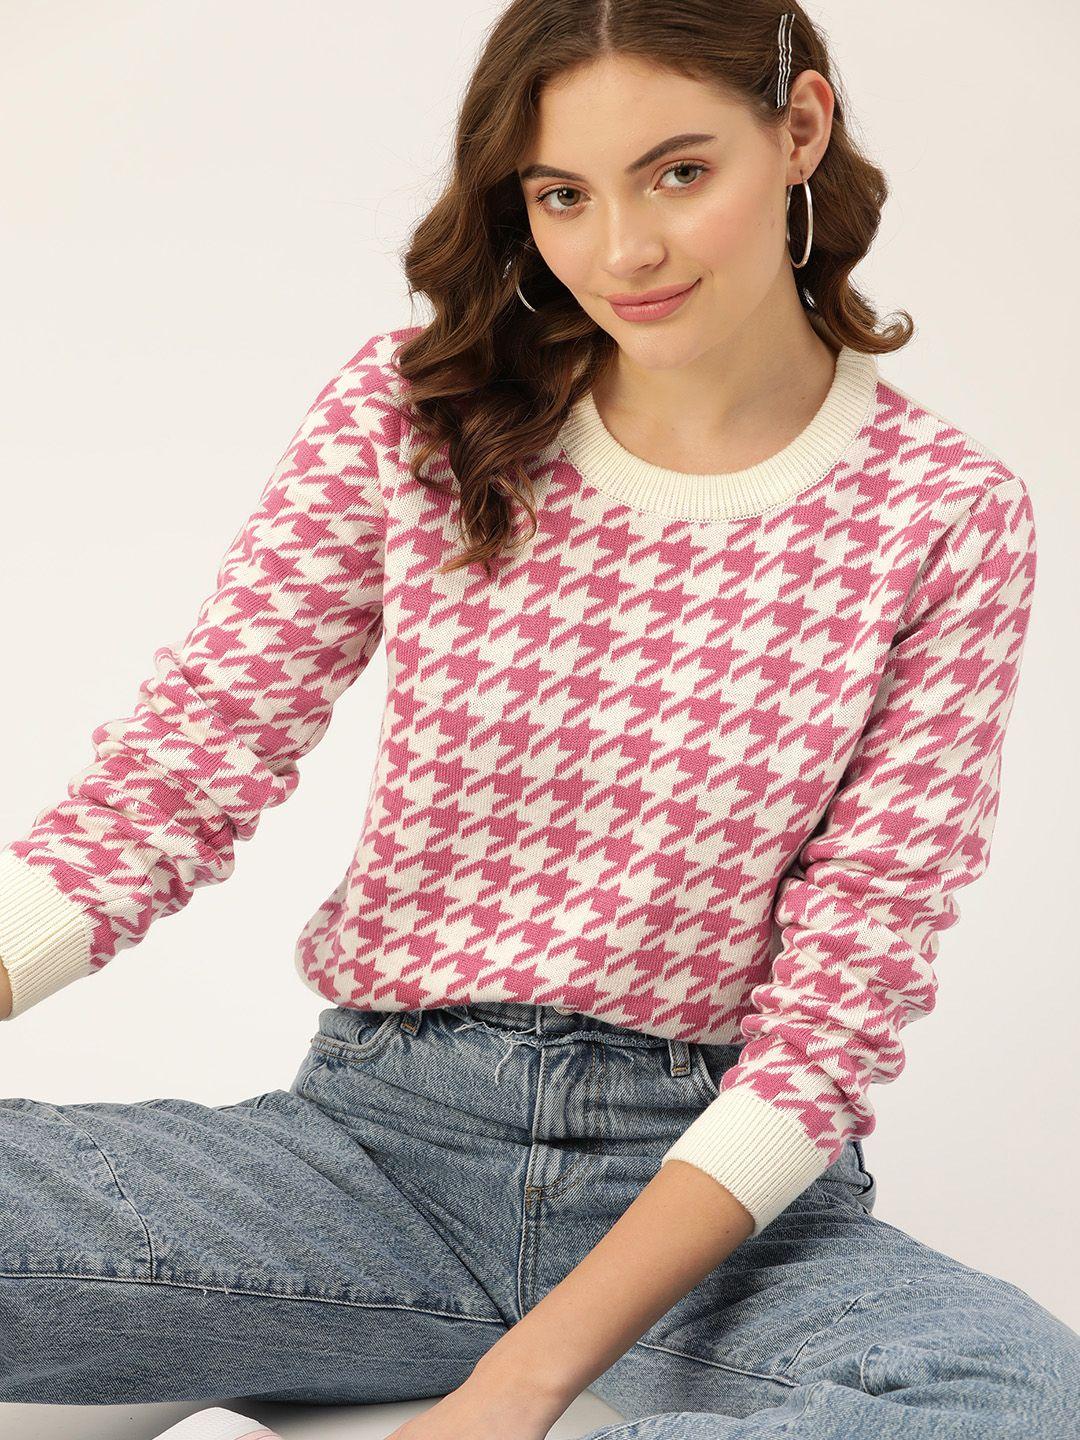 dressberry-women-pink-&-off-white-houndstooth-pattern-pullover